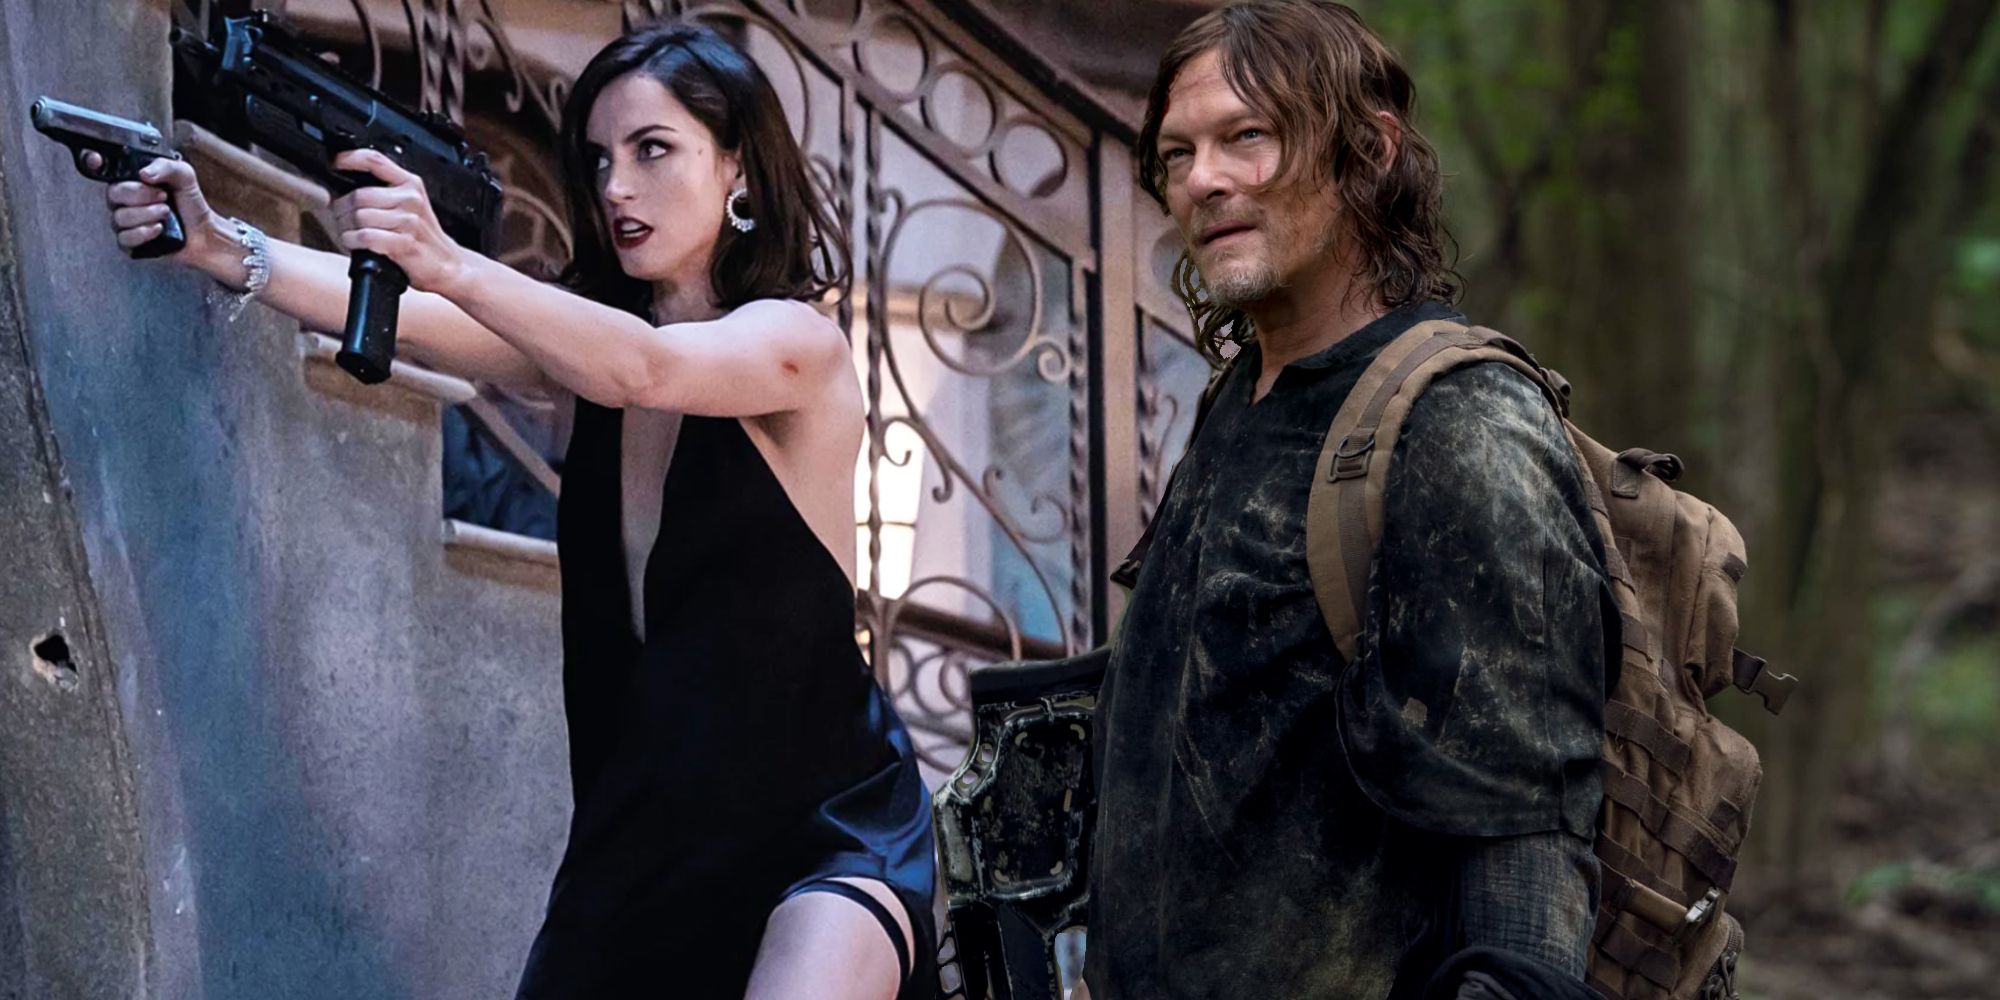 TWD’s Norman Reedus Joins John Wick Franchise In Ballerina Spinoff